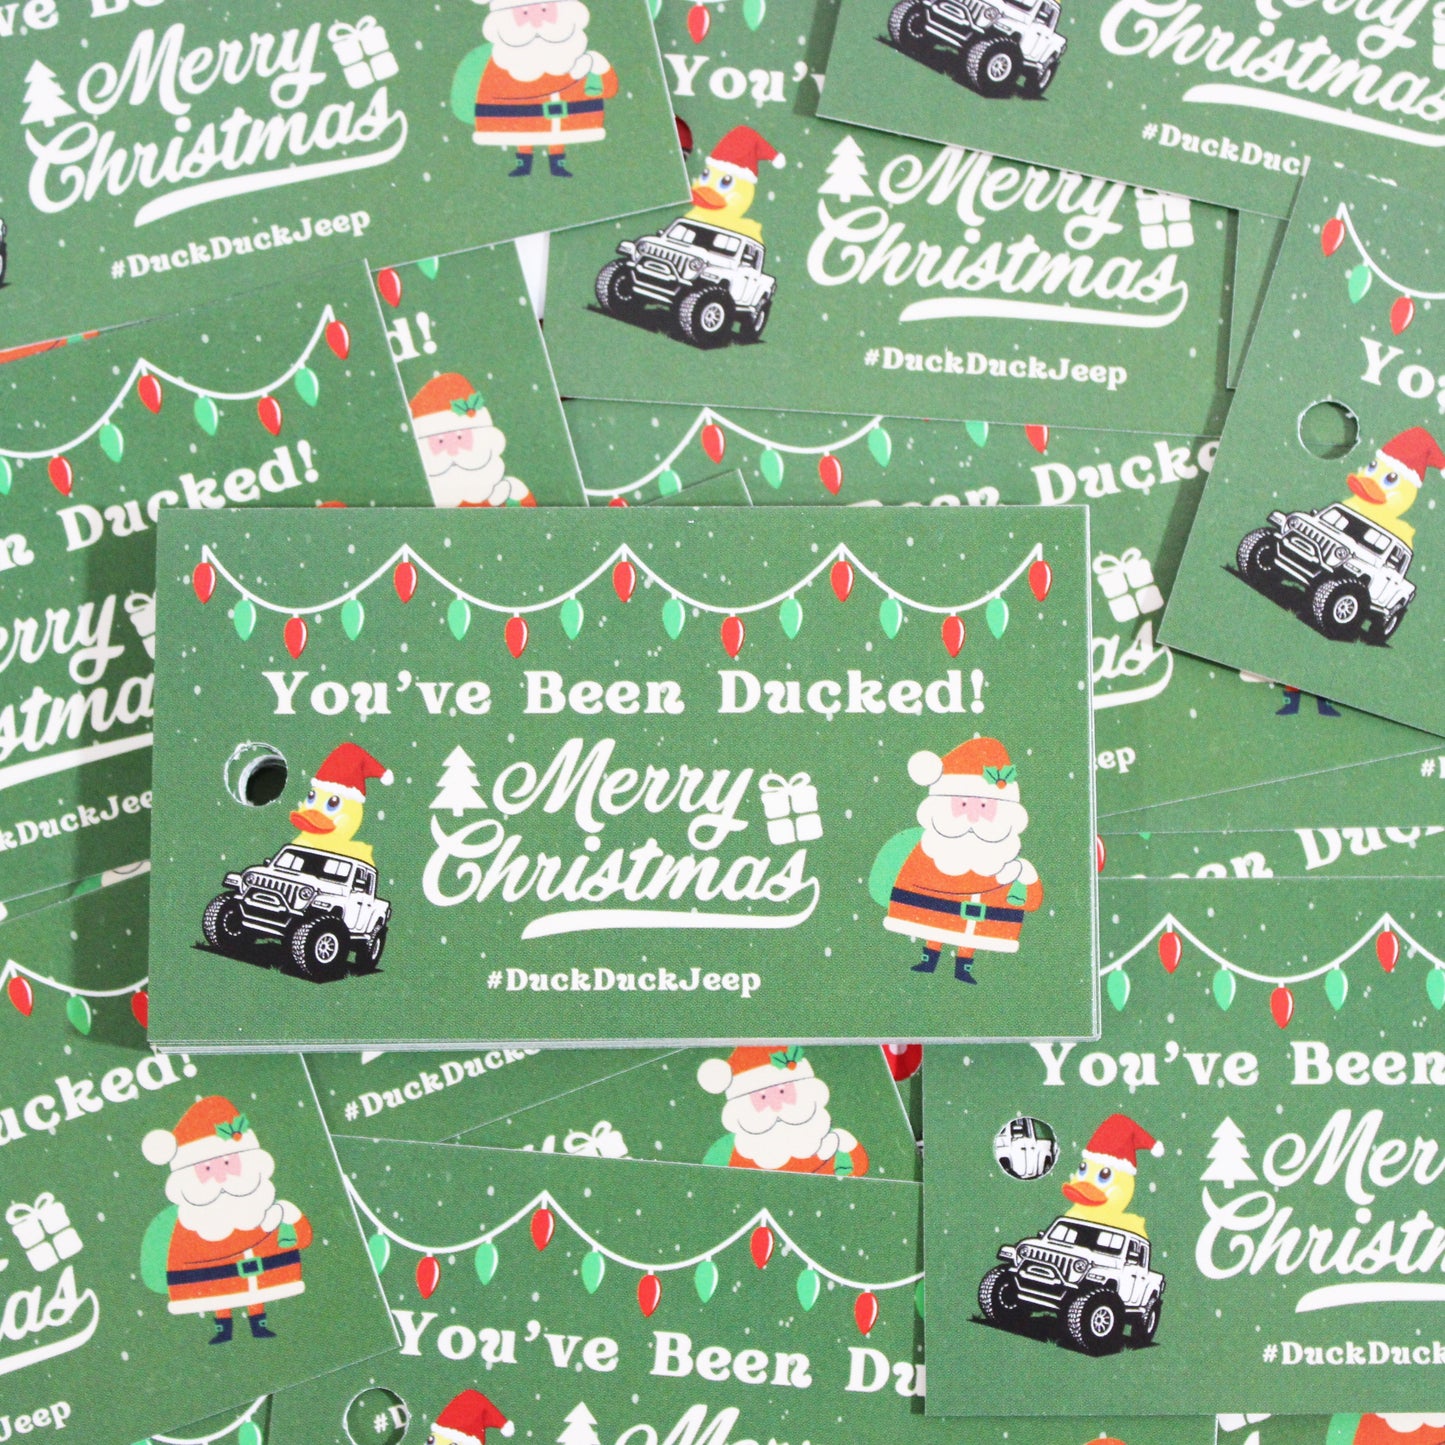 50 Christmas-Themed Tags for Duck Duck Jeep